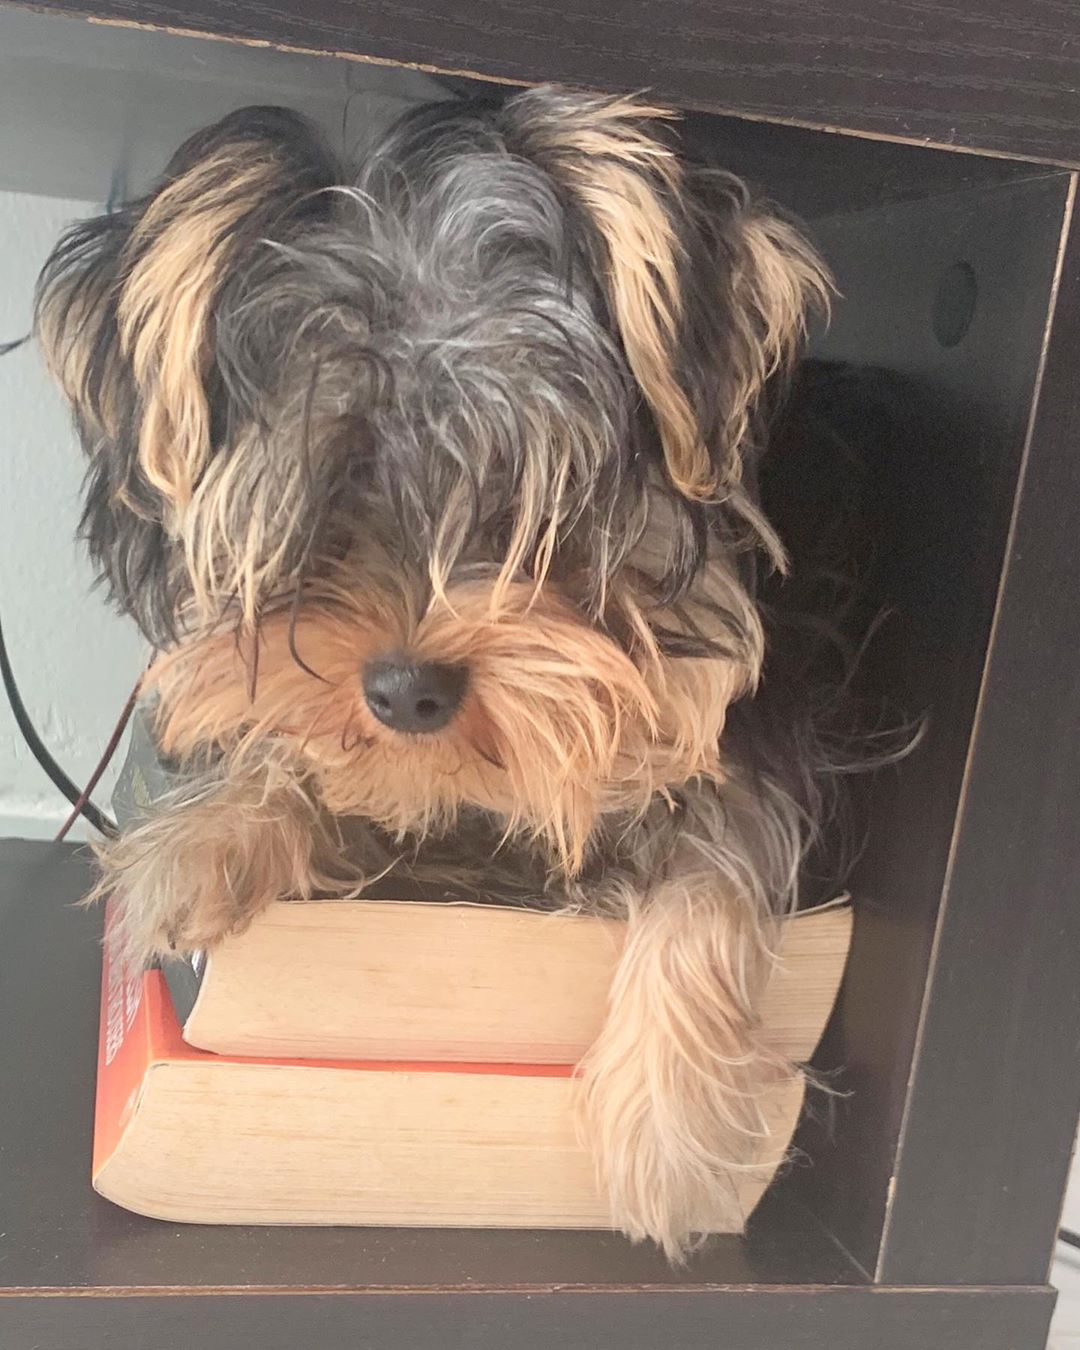 A Yorkshire Terrier lying on top of two thick books under the table